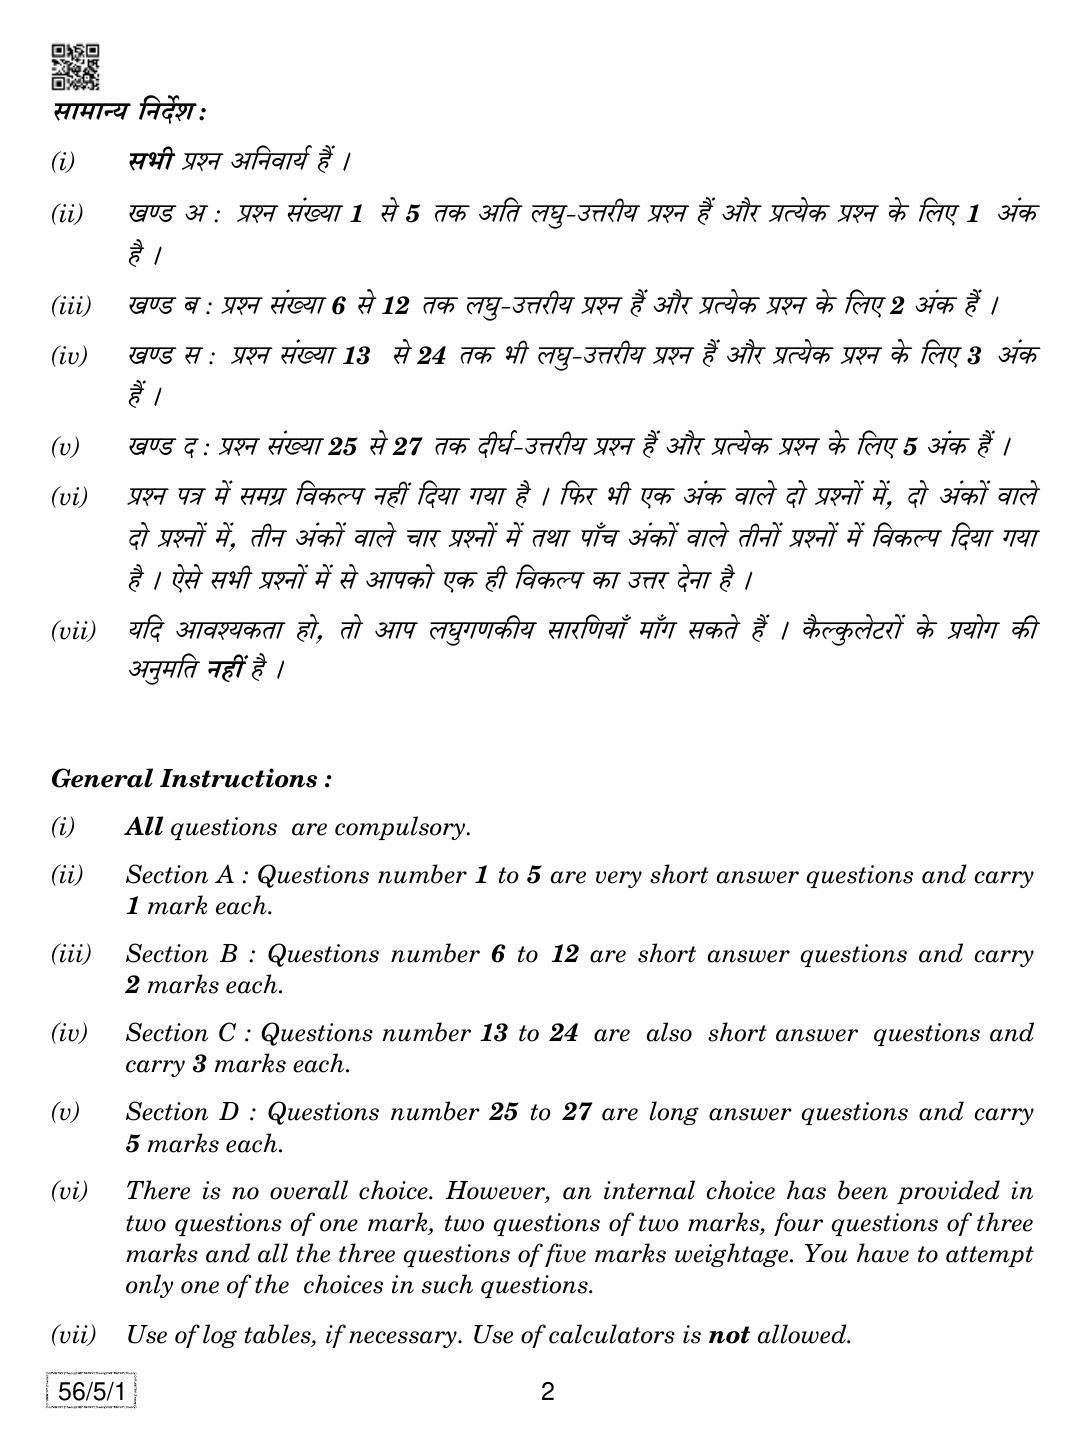 CBSE Class 12 56-5-1 Chemistry 2019 Question Paper - Page 2